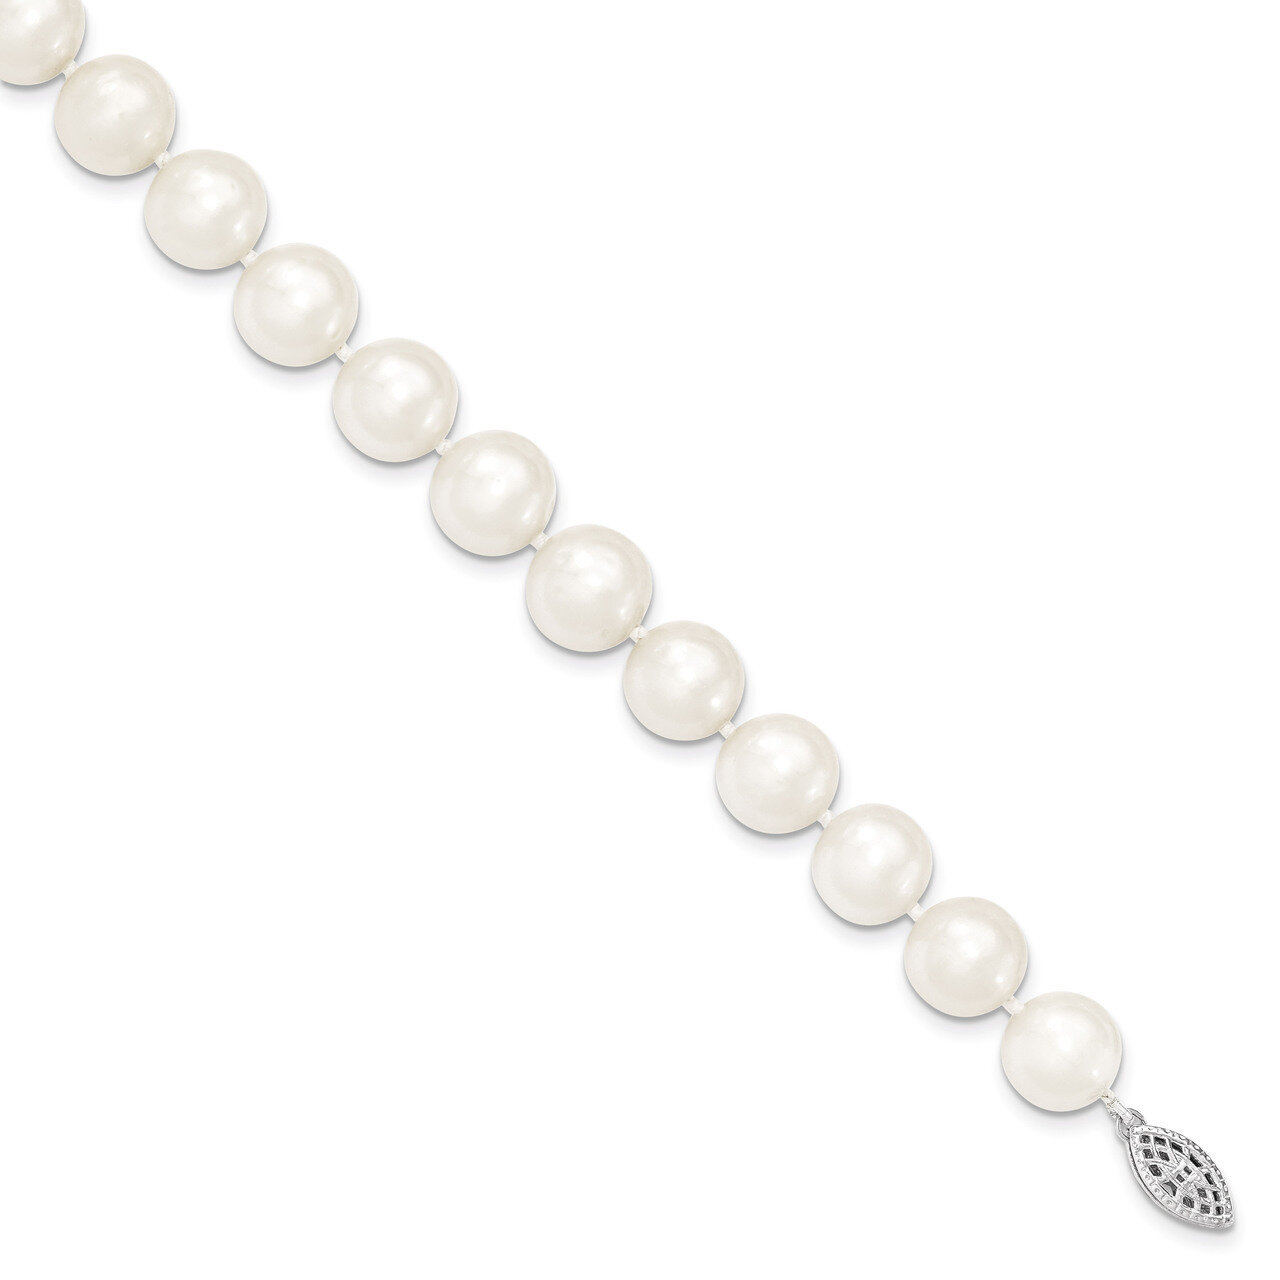 10-11mm White Cultured Pearl Bracelet Sterling Silver QH4828-7.25